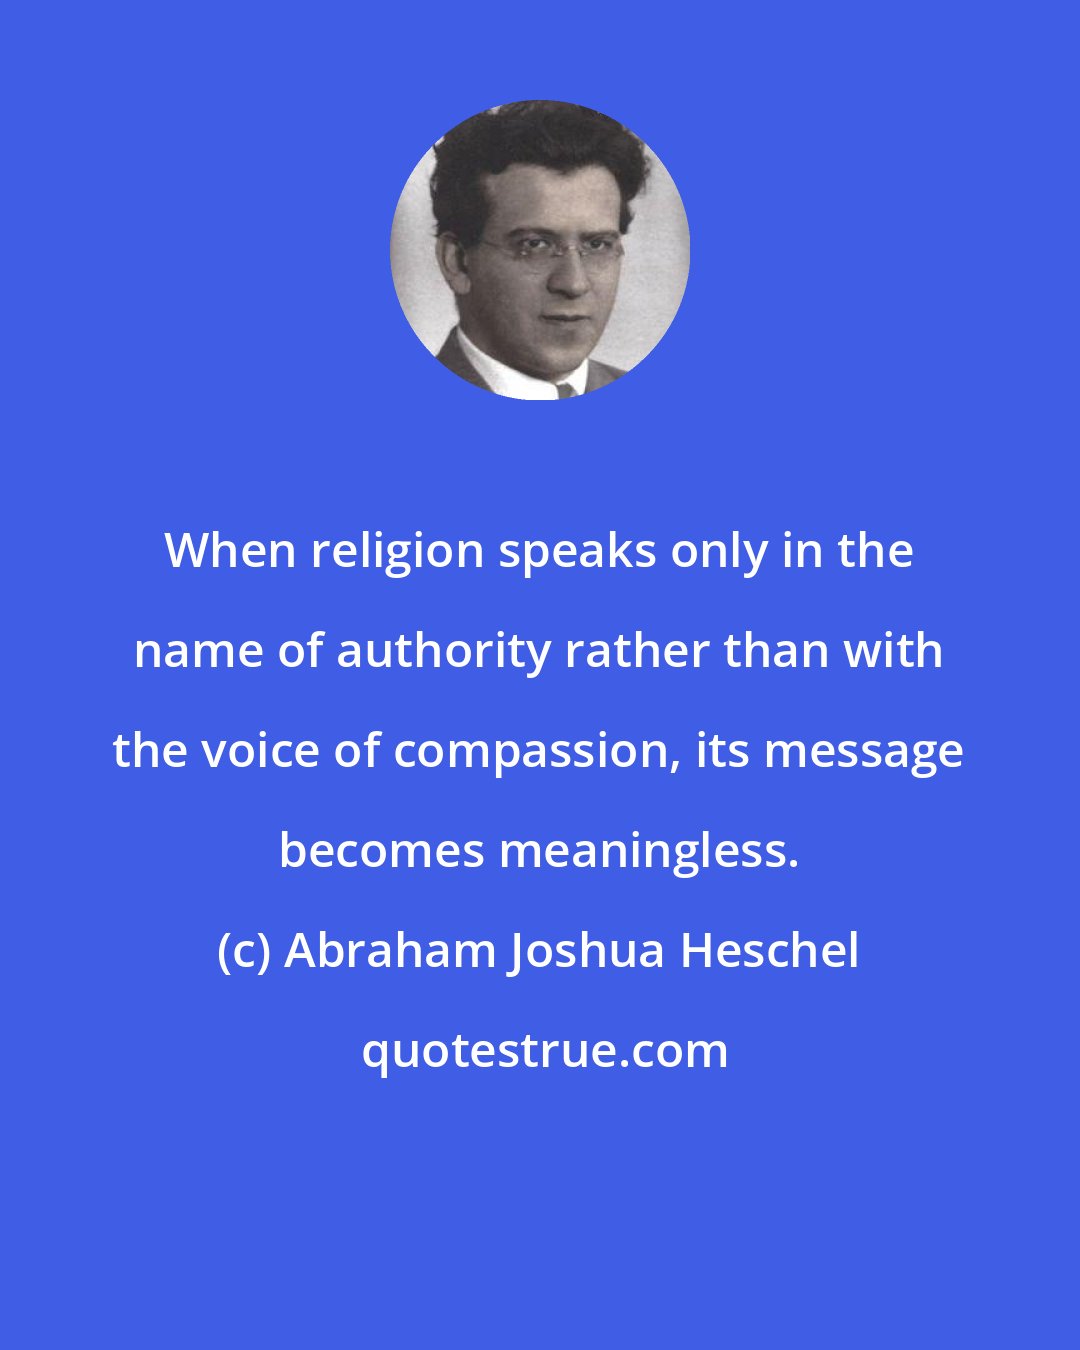 Abraham Joshua Heschel: When religion speaks only in the name of authority rather than with the voice of compassion, its message becomes meaningless.